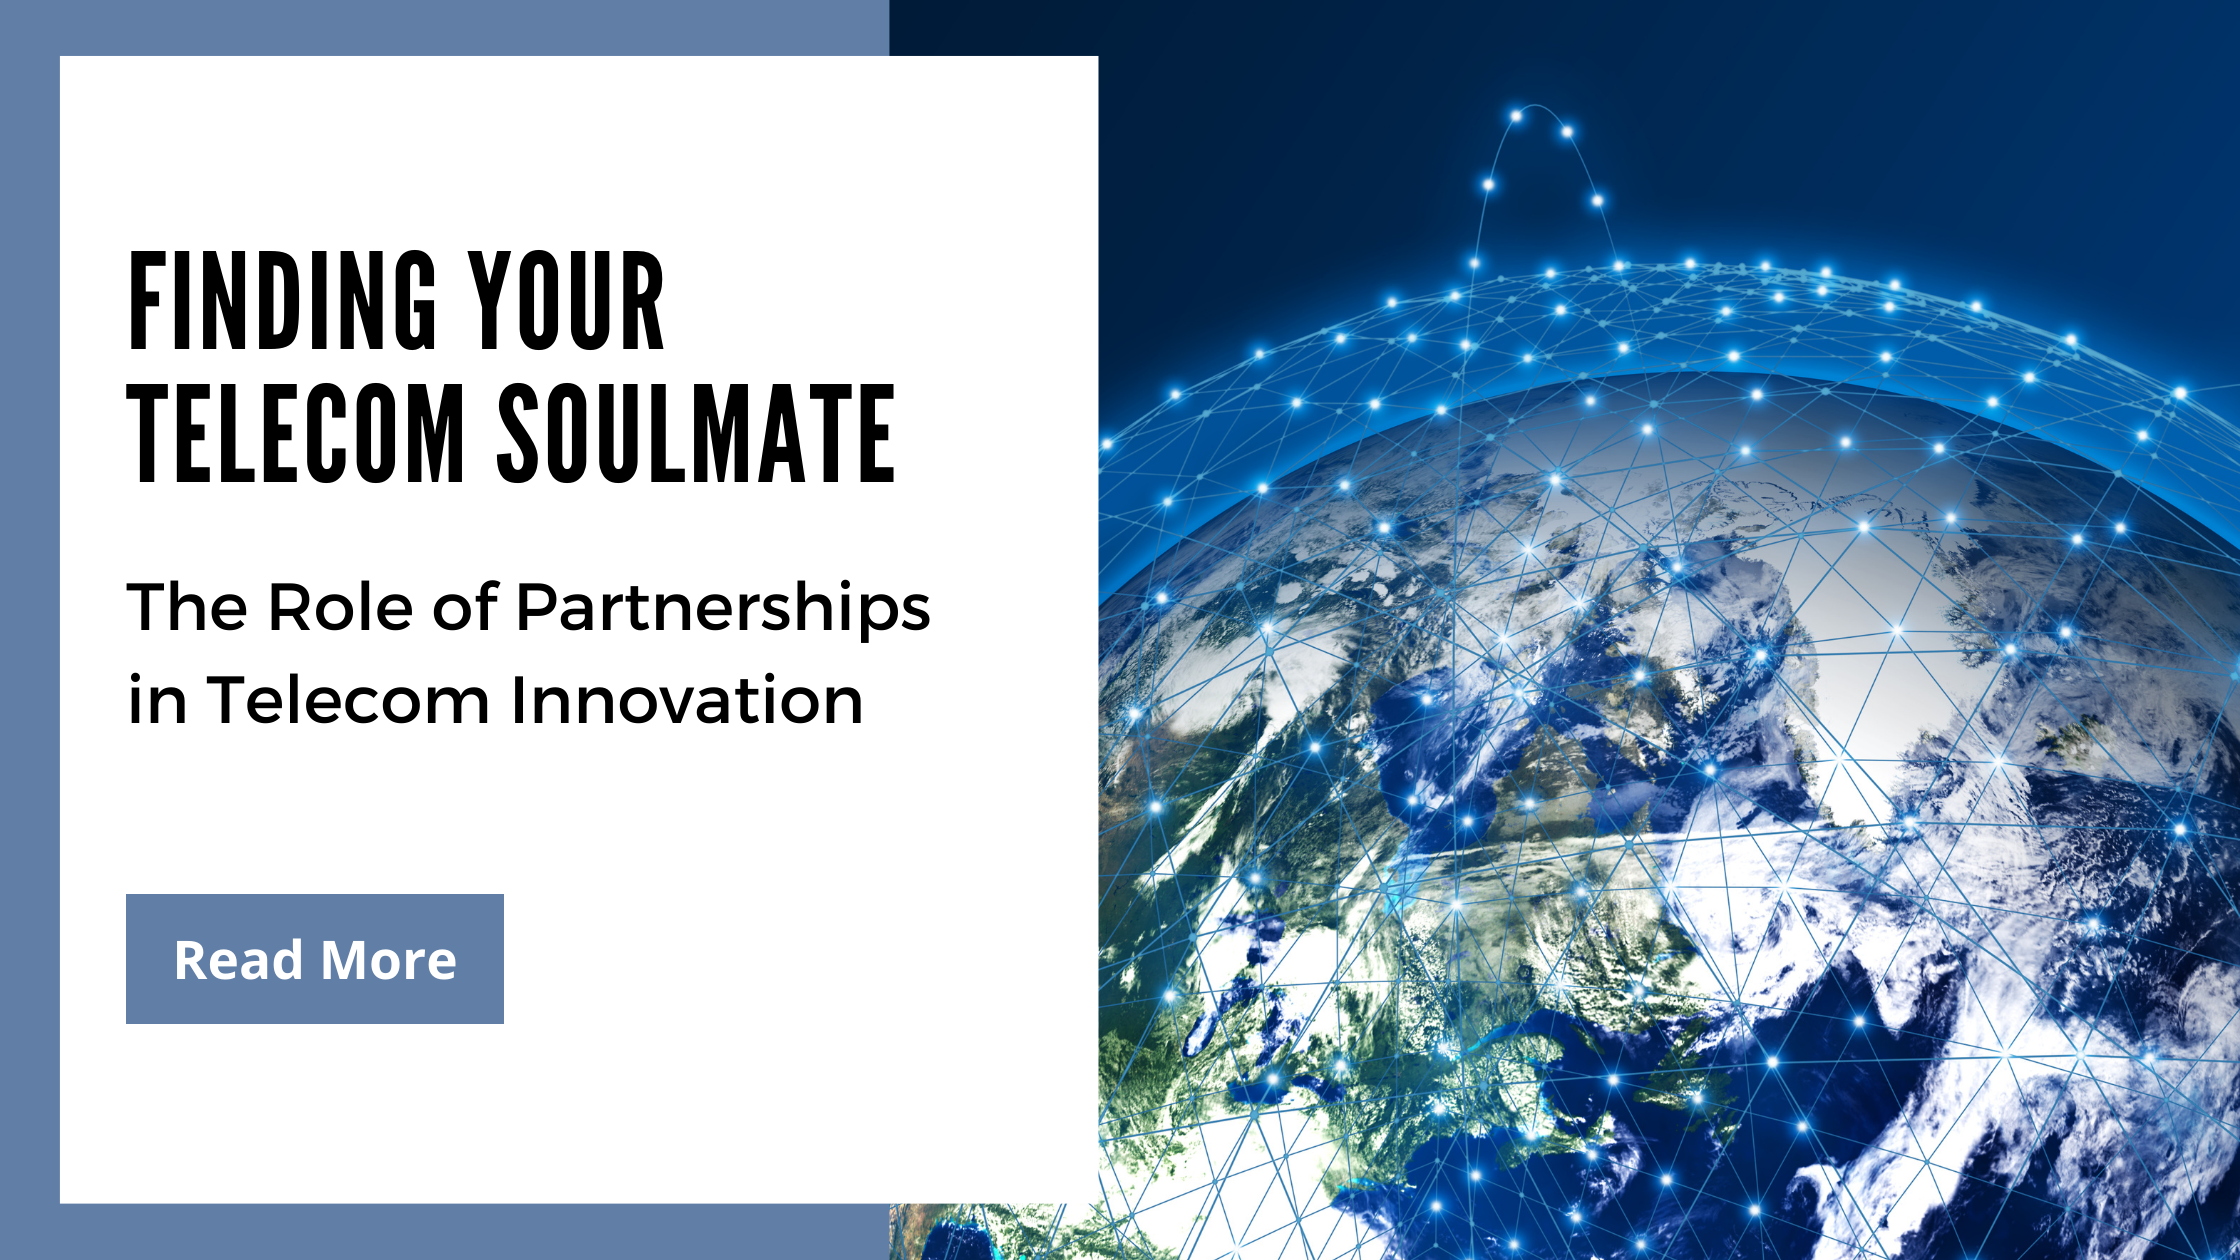 Finding Your Telecom Soulmate: The Role of Partnerships in Telecom Innovation